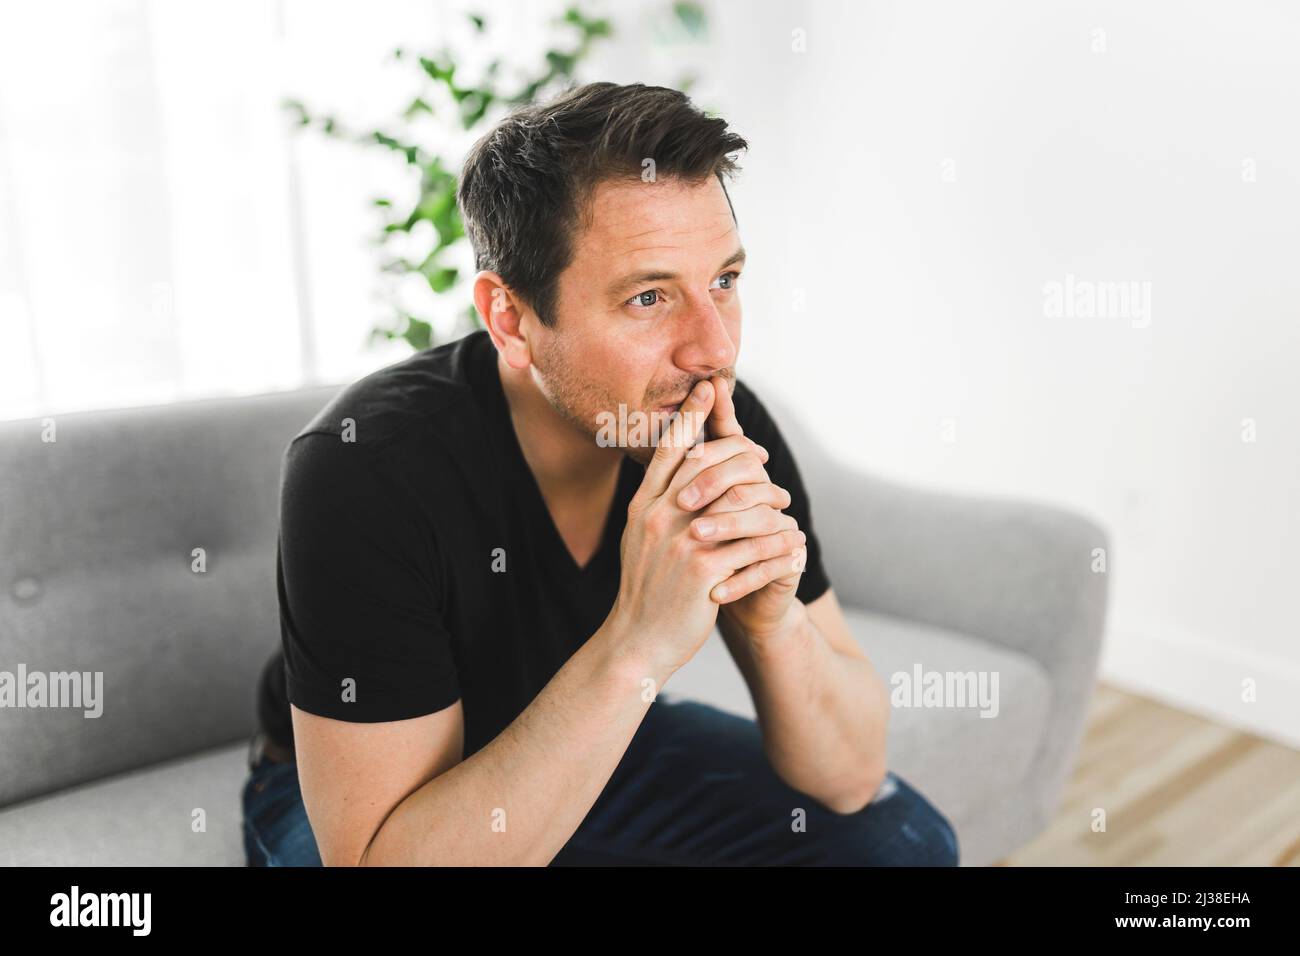 Depressed and thinking man thinking at home on couch Stock Photo